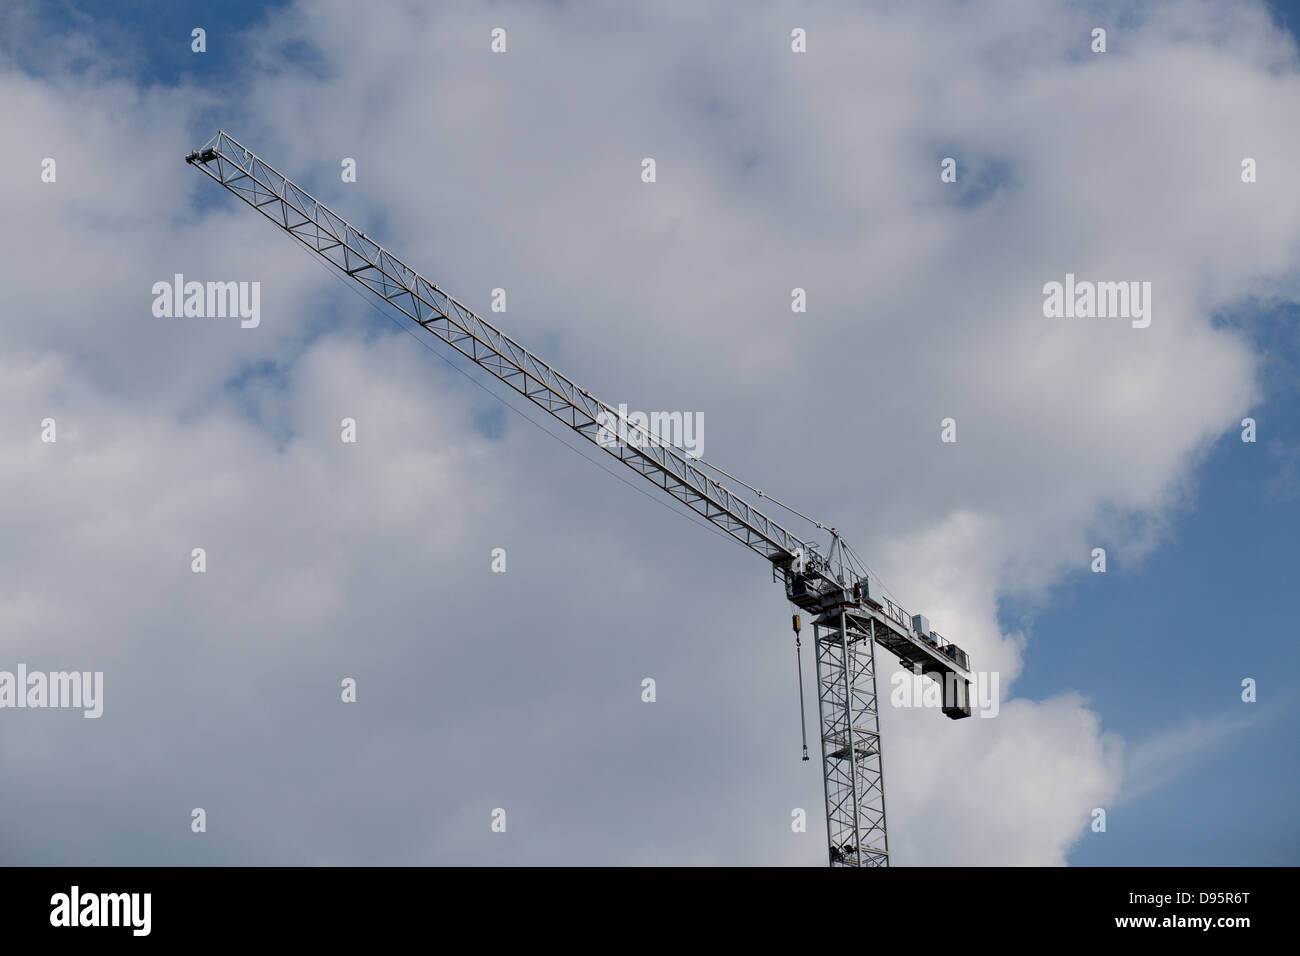 Construction cranes in operation. On the background a dramatic sky. Stock Photo